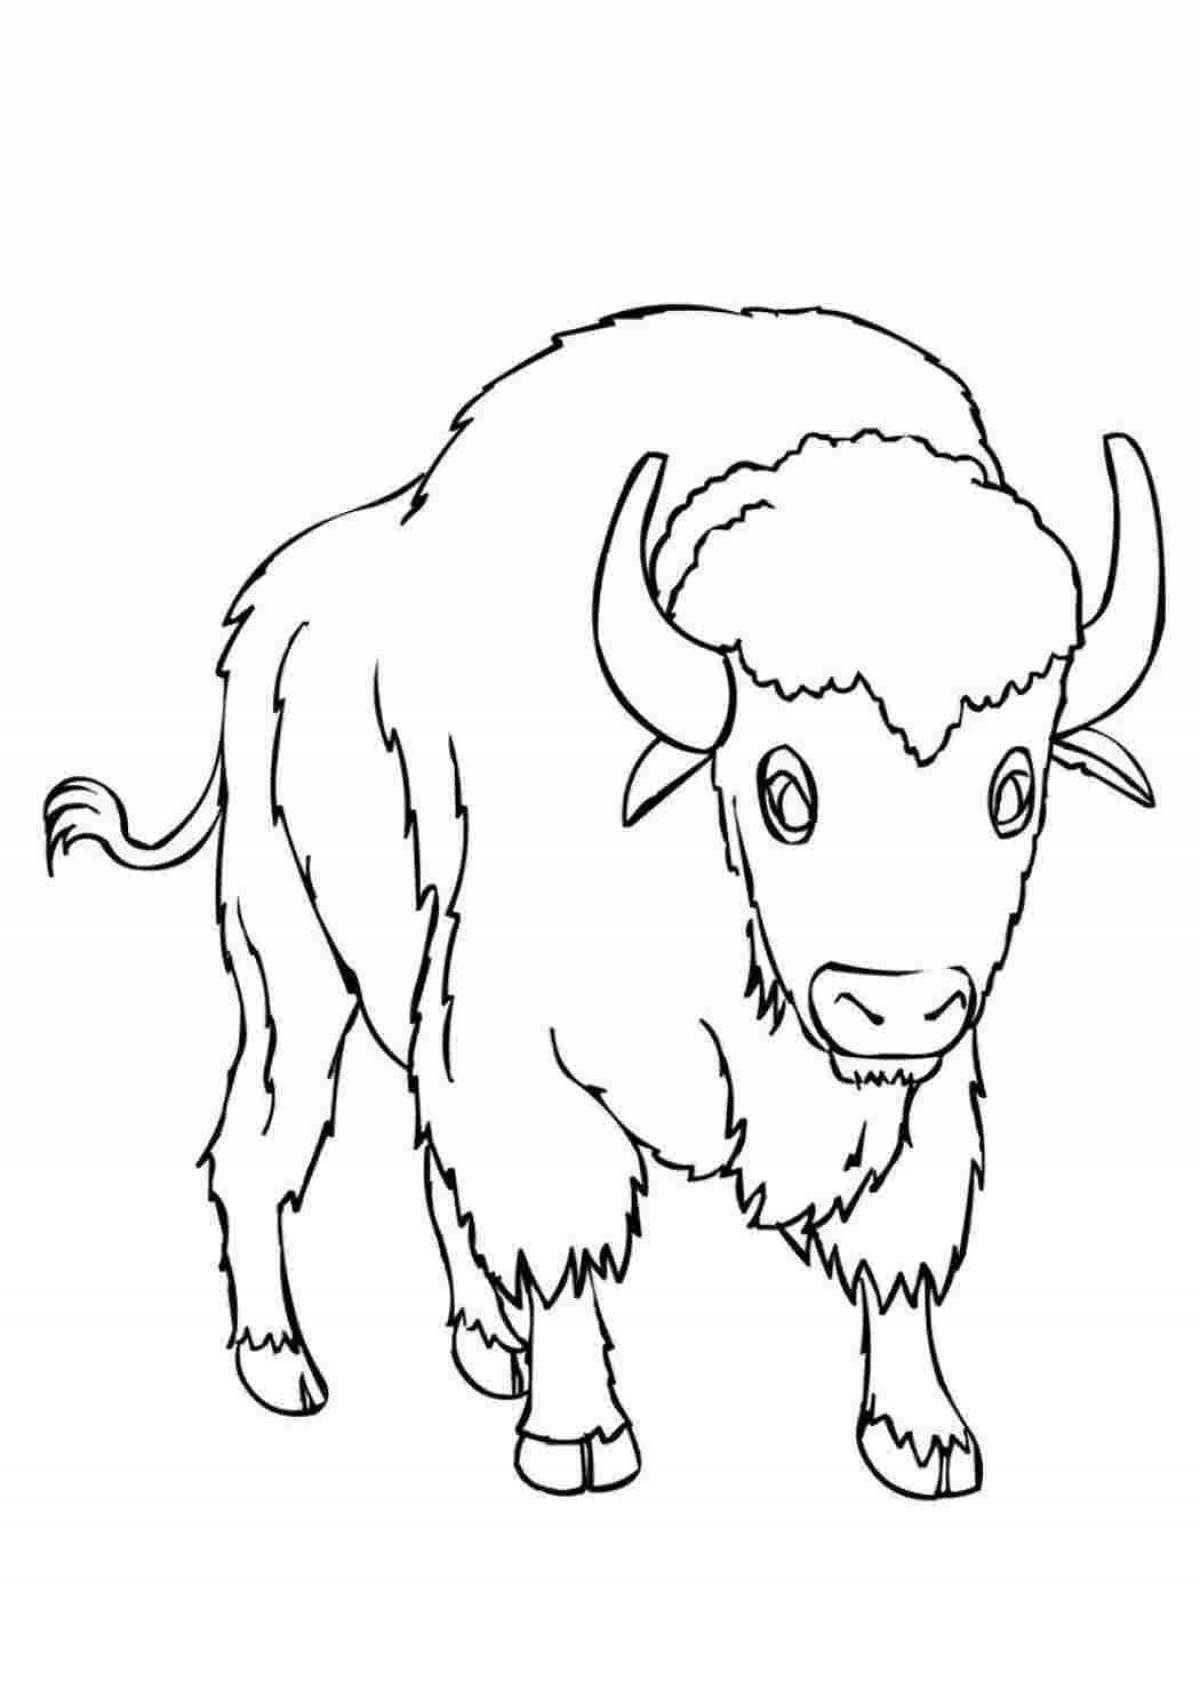 Coloring book glowing bison